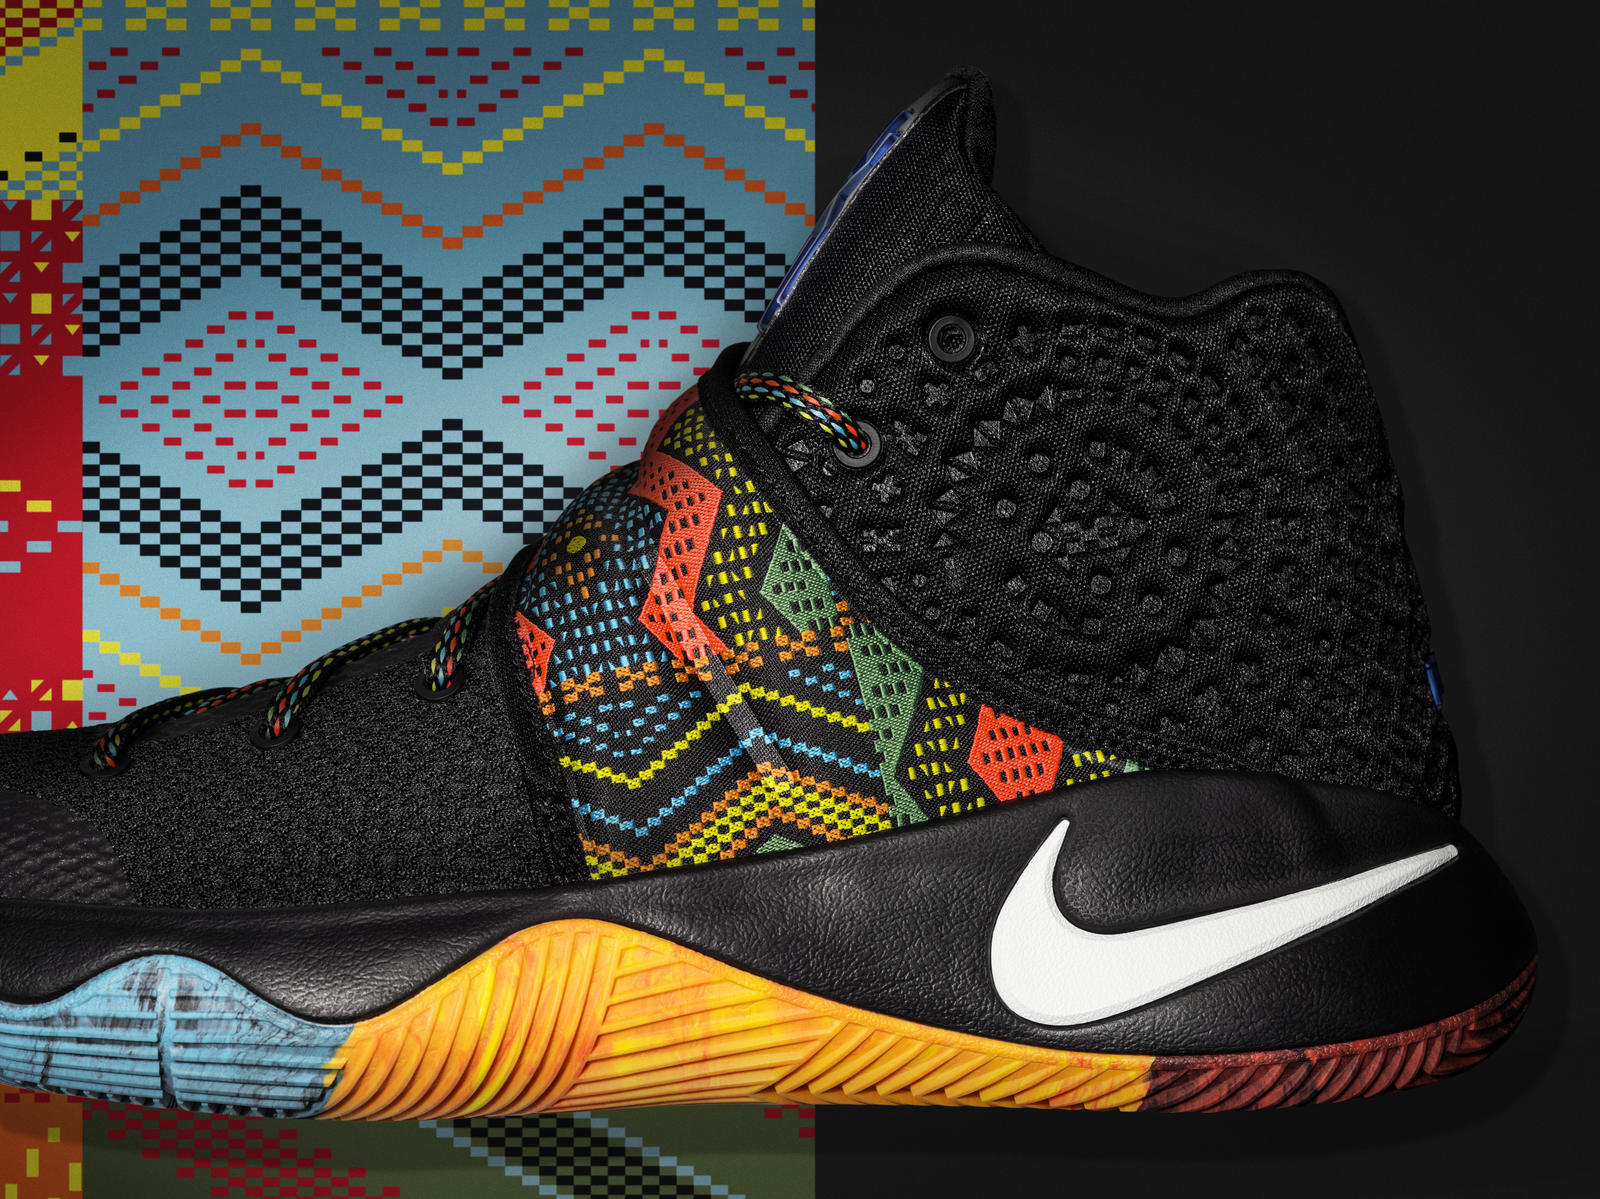 kyrie irving shoes black history month